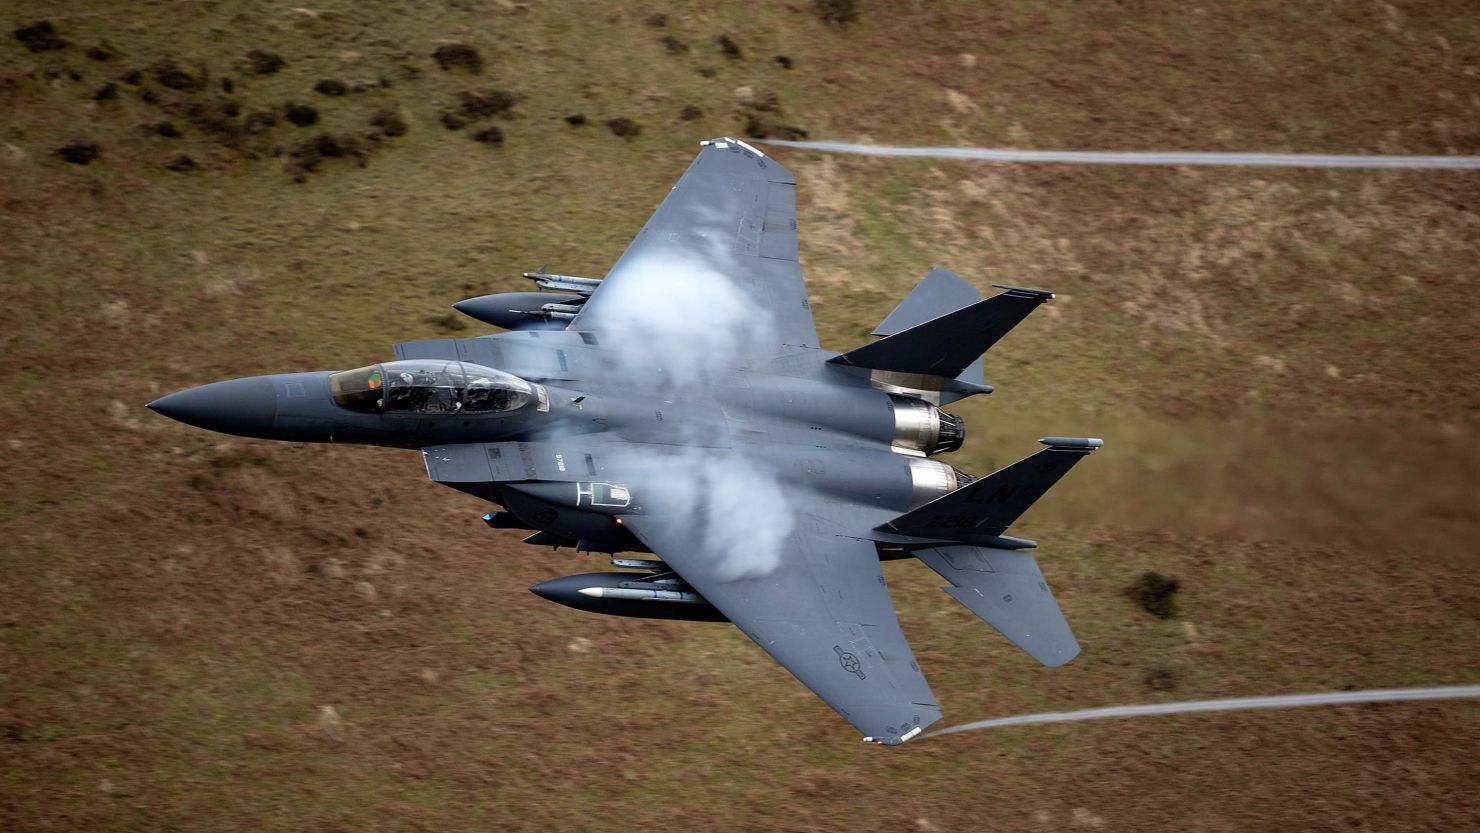  A United States Air Force F-15 fighter jet based at RAF Lakenheath speeds through the Dinas Pass, known in the aviation world as the Mach Loop in Dolgellau, Wales.  